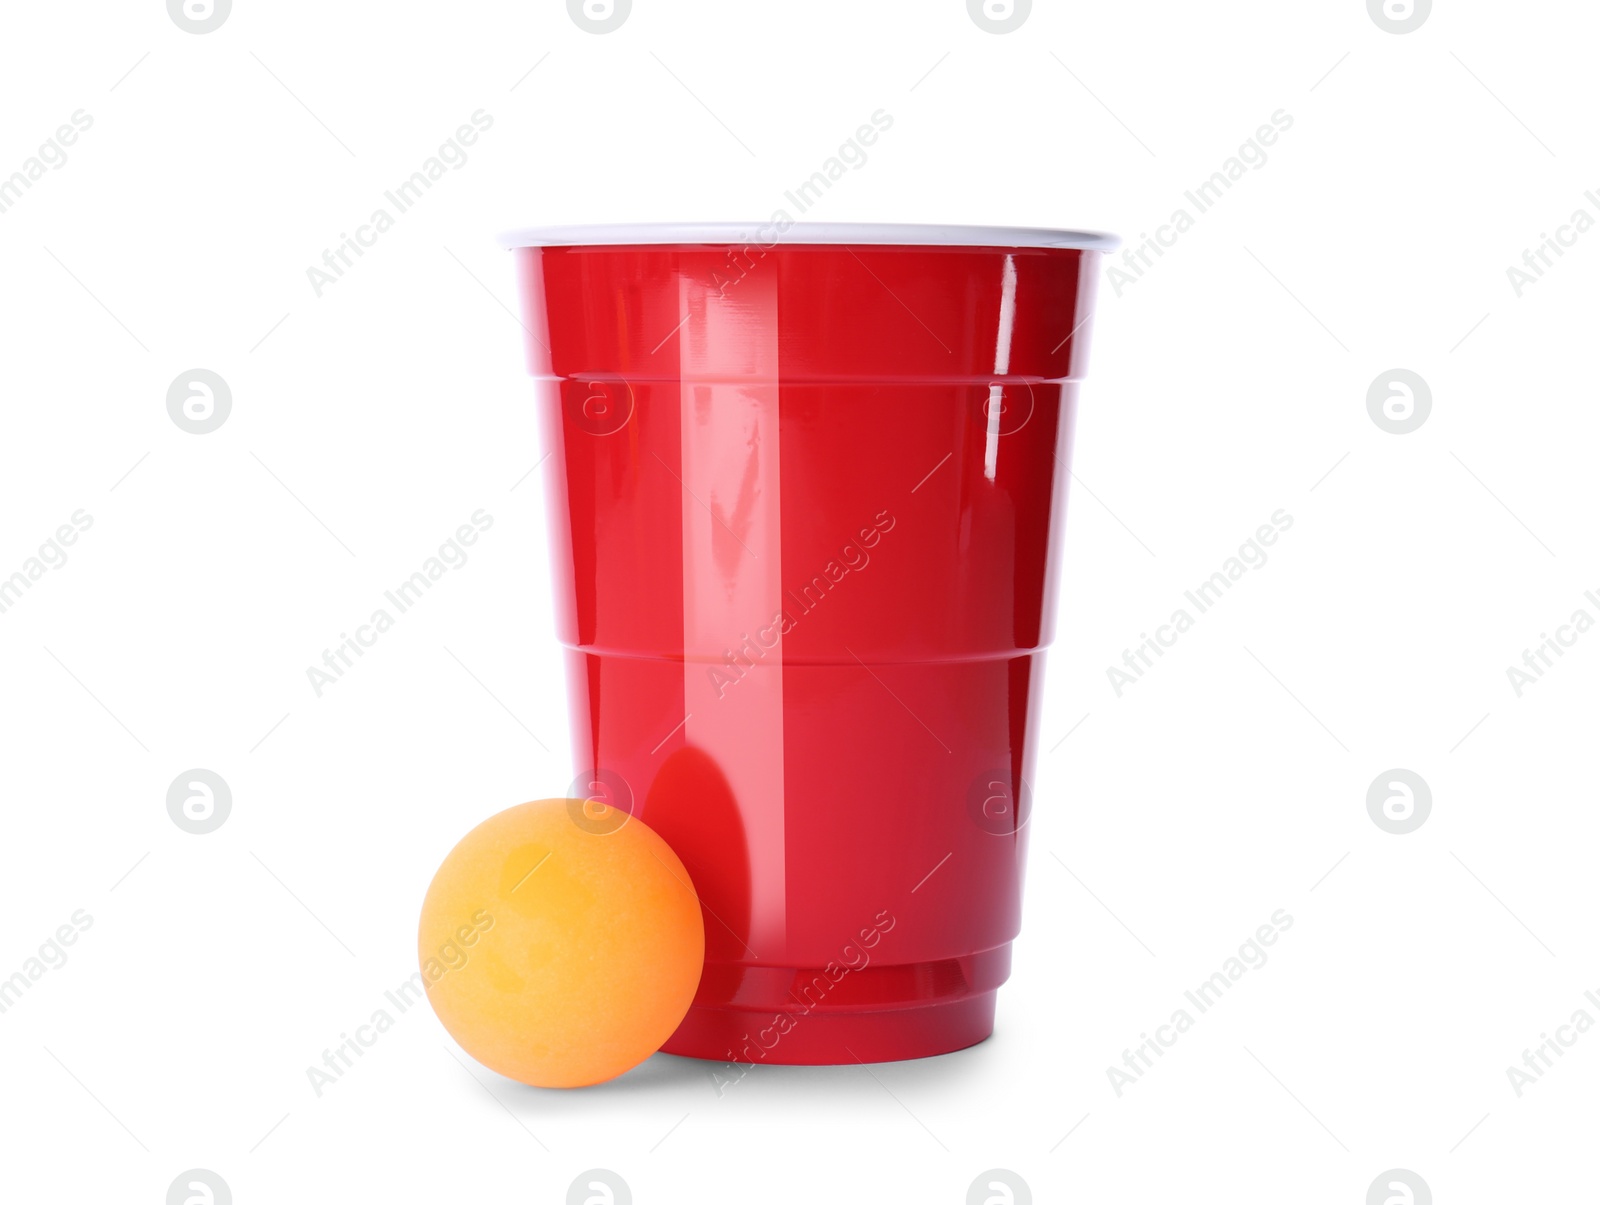 Photo of Red plastic cup and ball for beer pong on white background